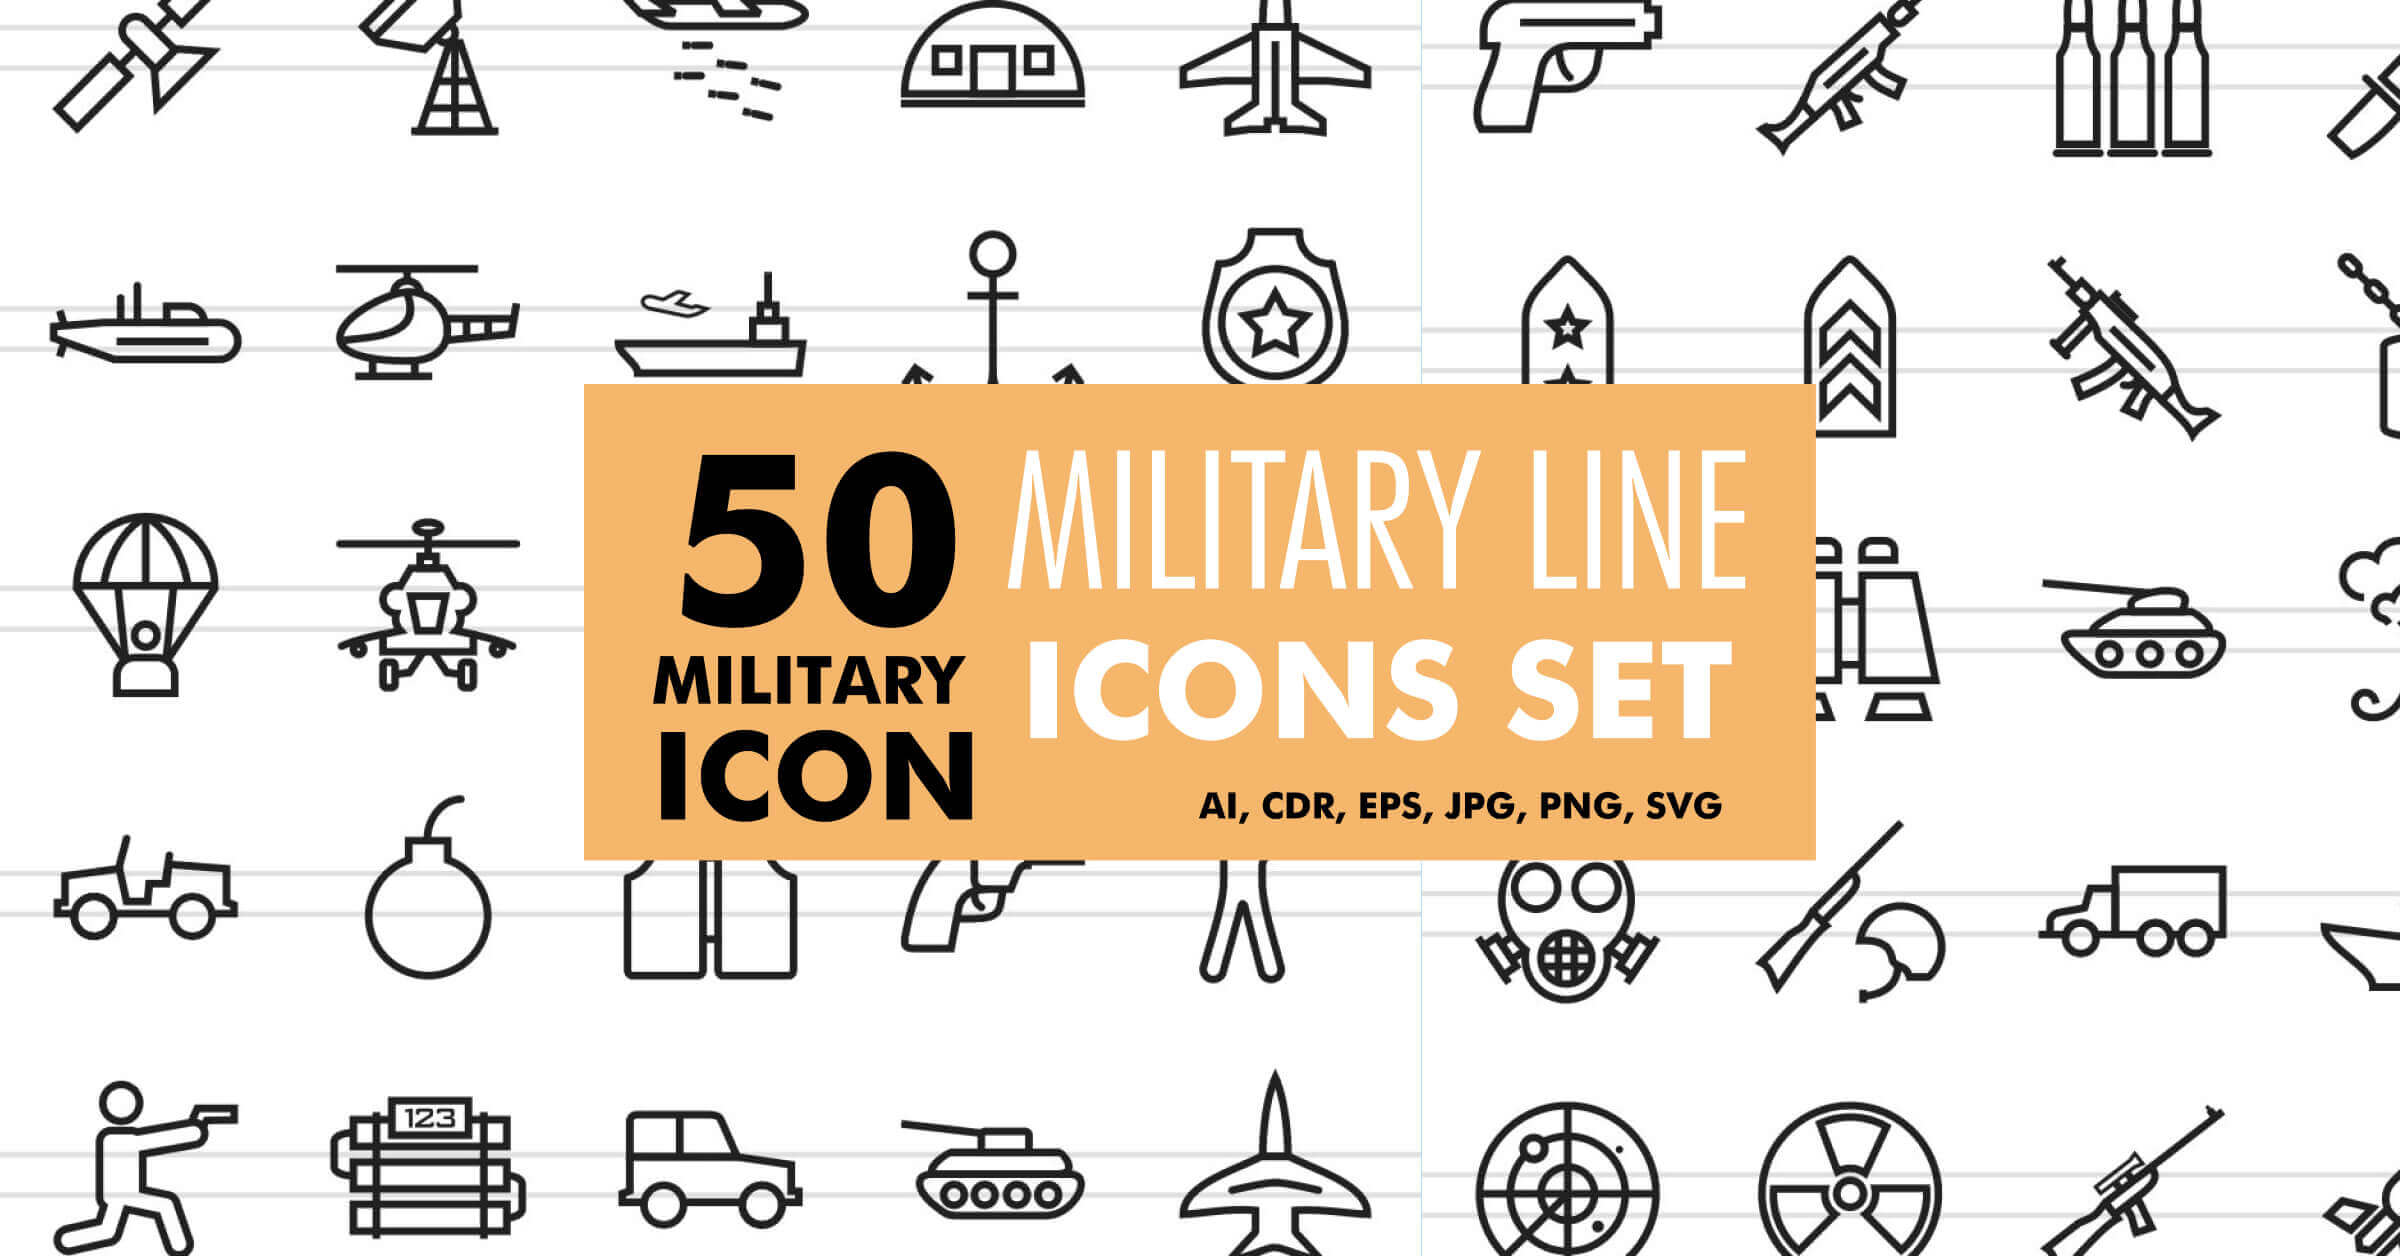 Icons with elementary military images.